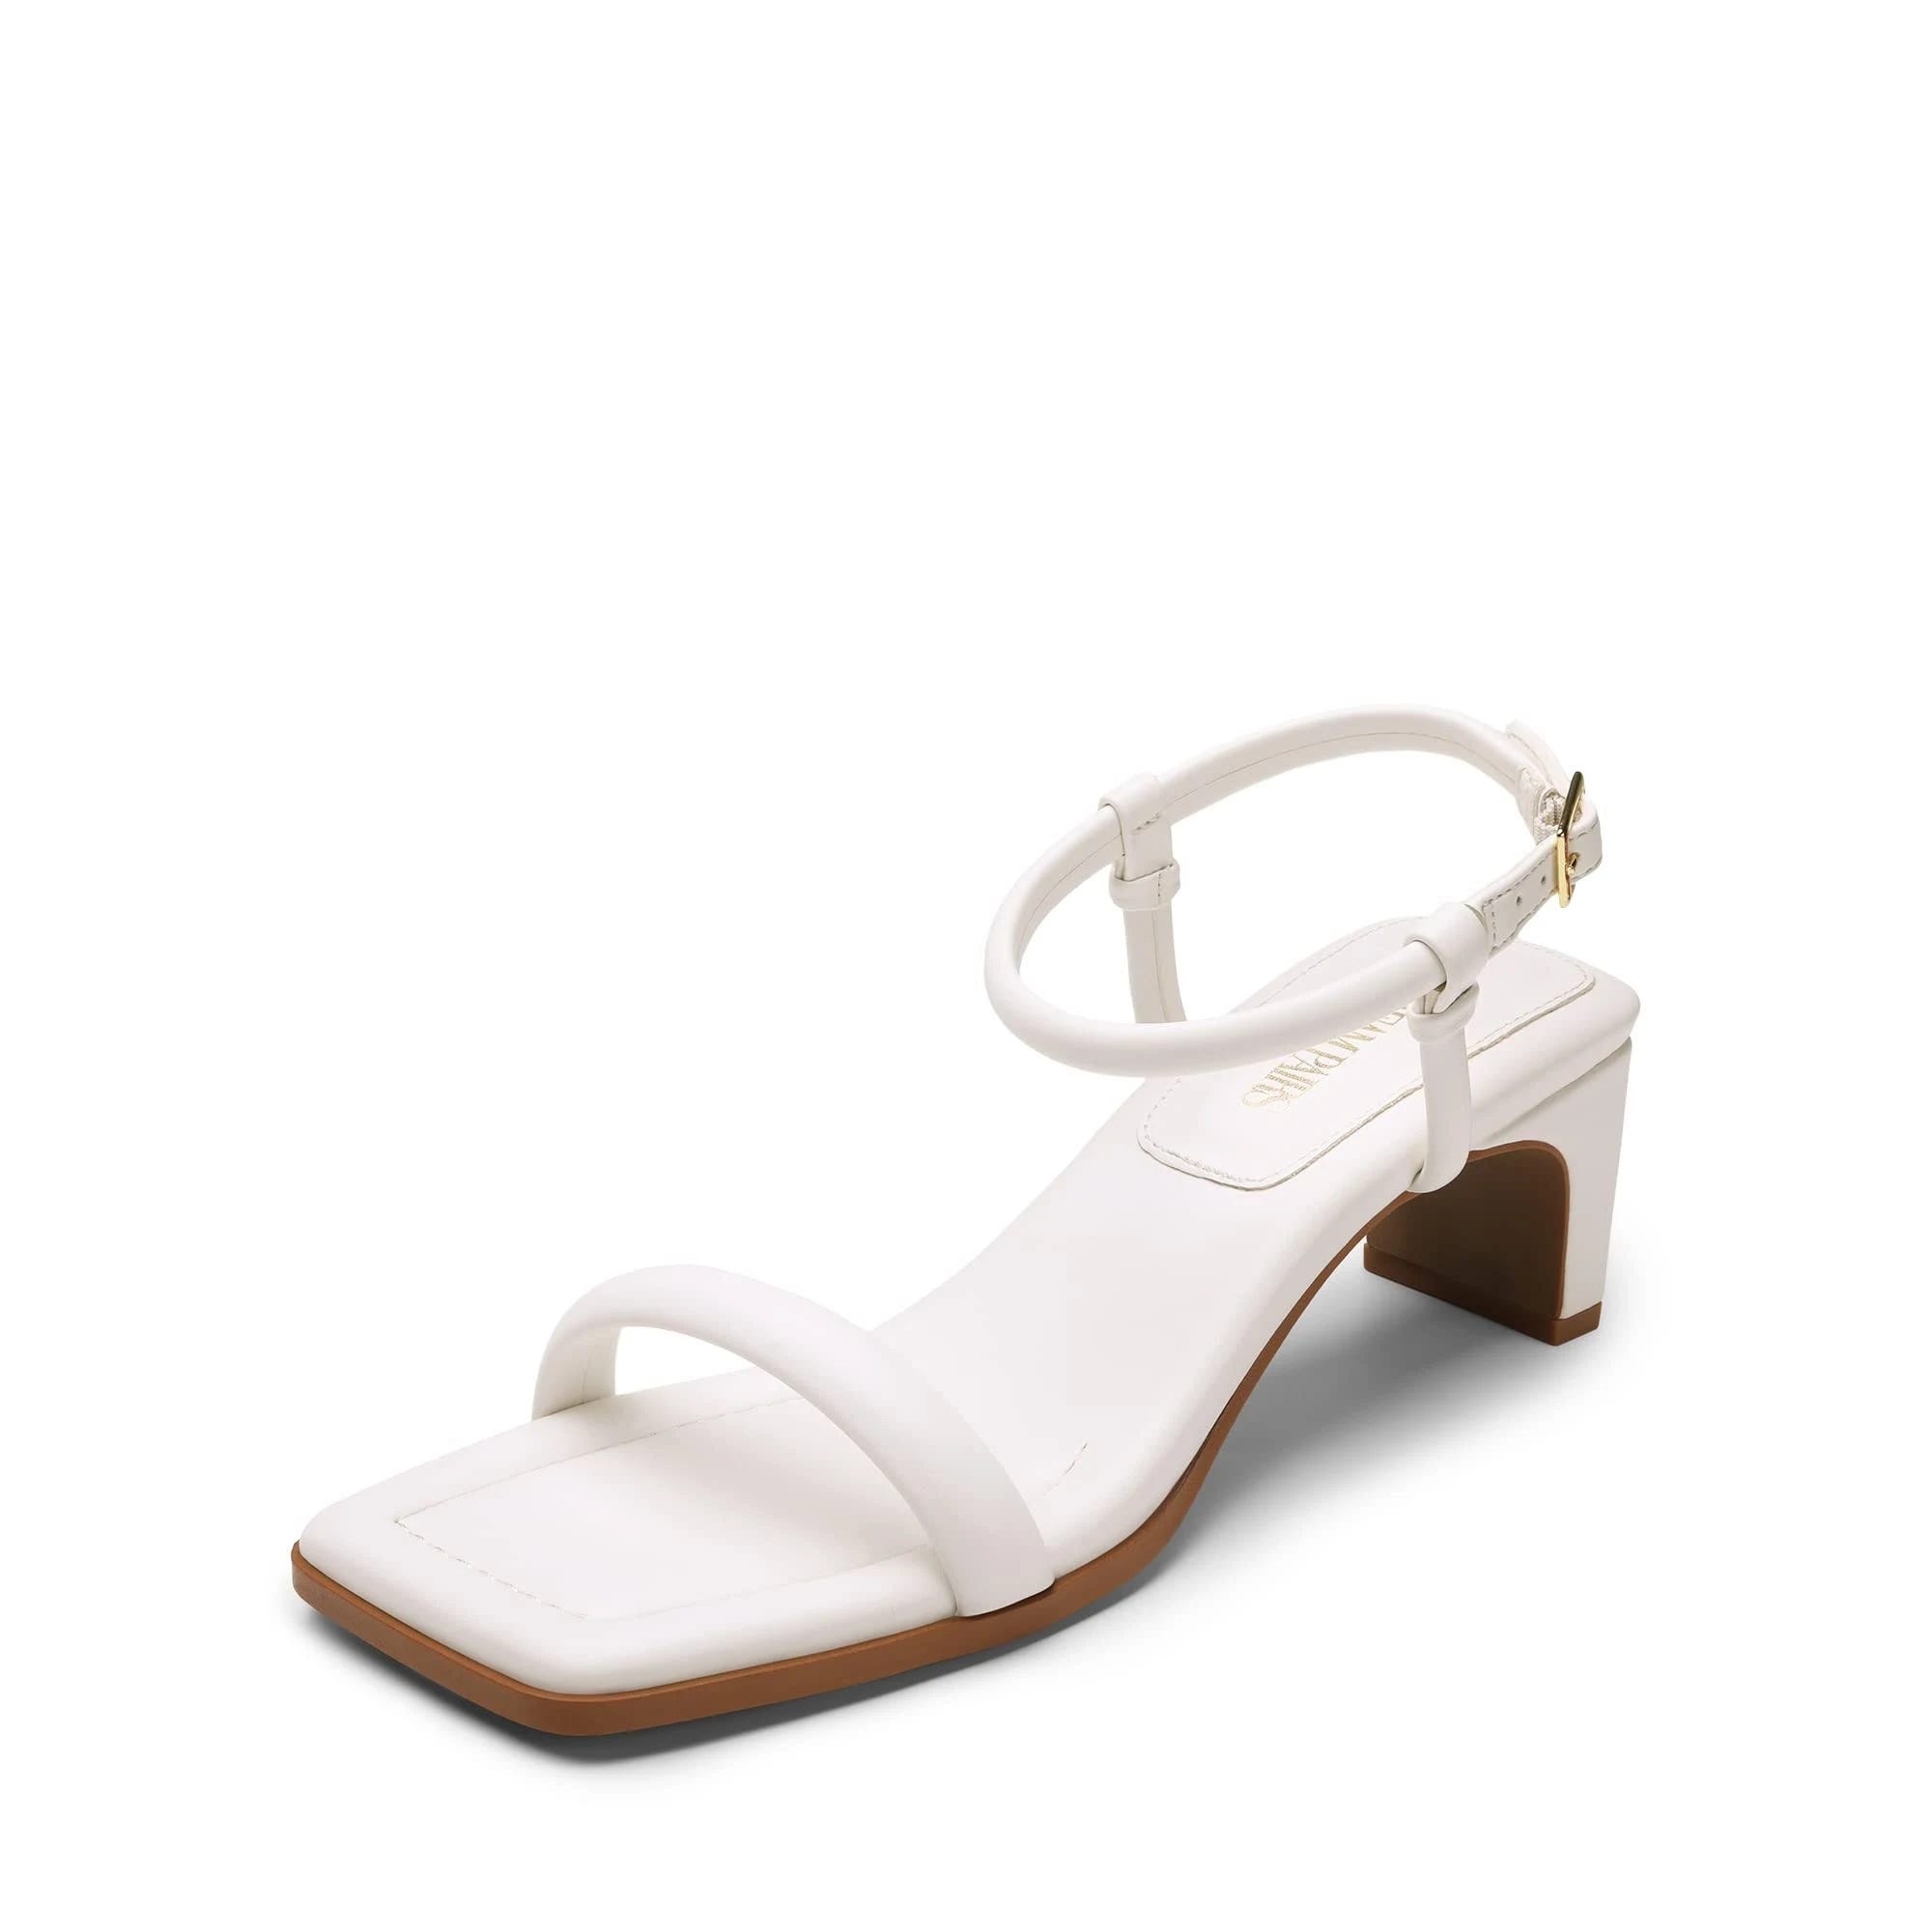 Comfortable White Heels with Adjustable Straps | Image